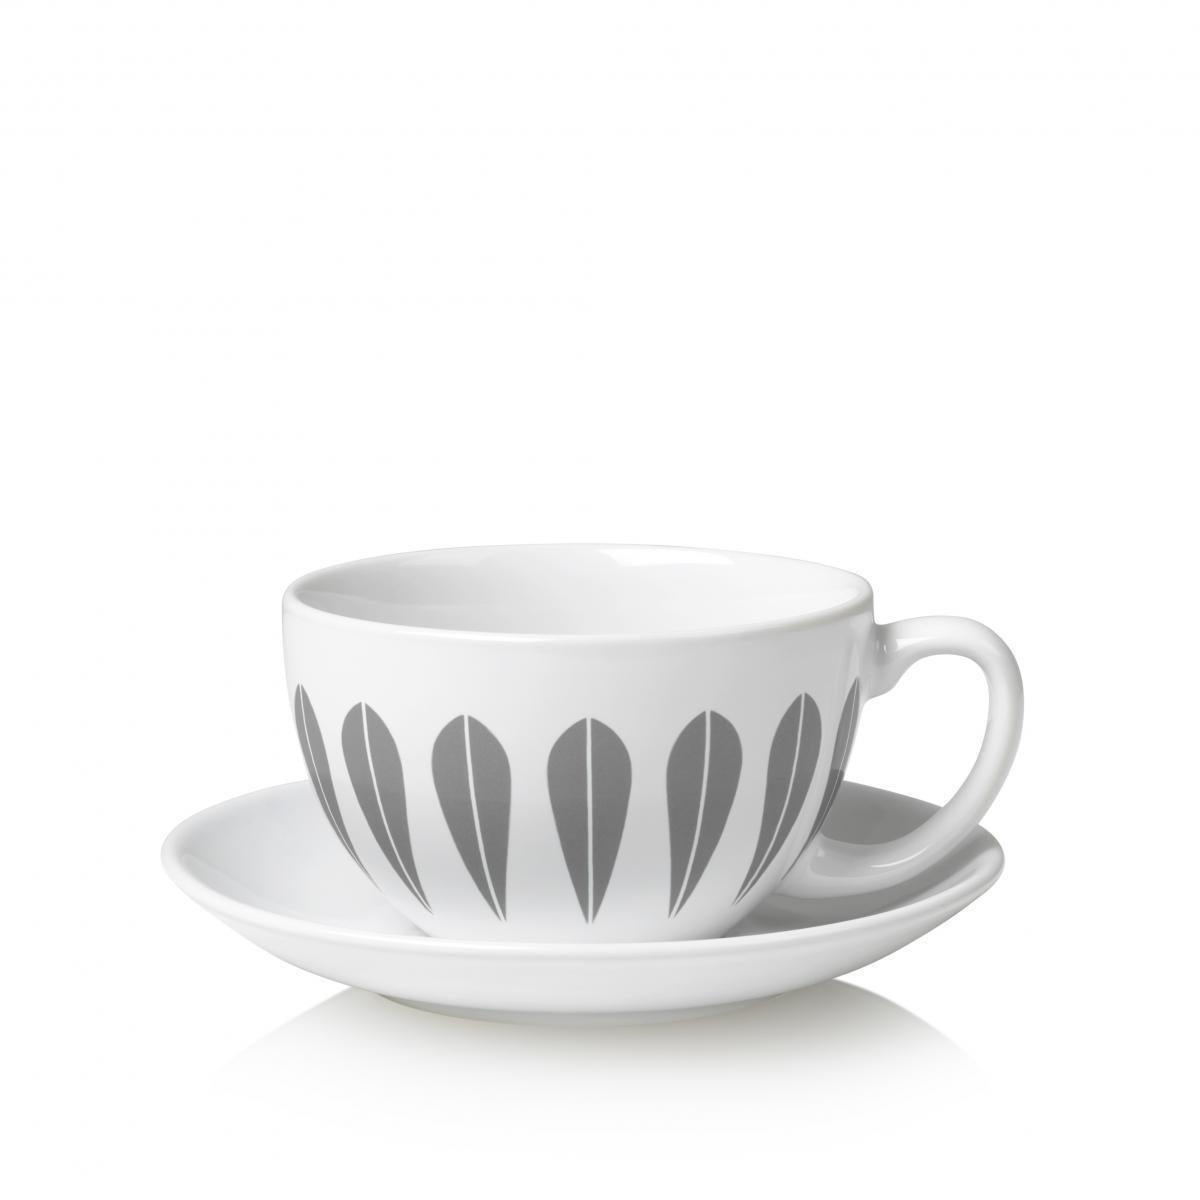 Lucie Kaas Arne Clausen Collection Cups W. Saucer Gray，10厘米